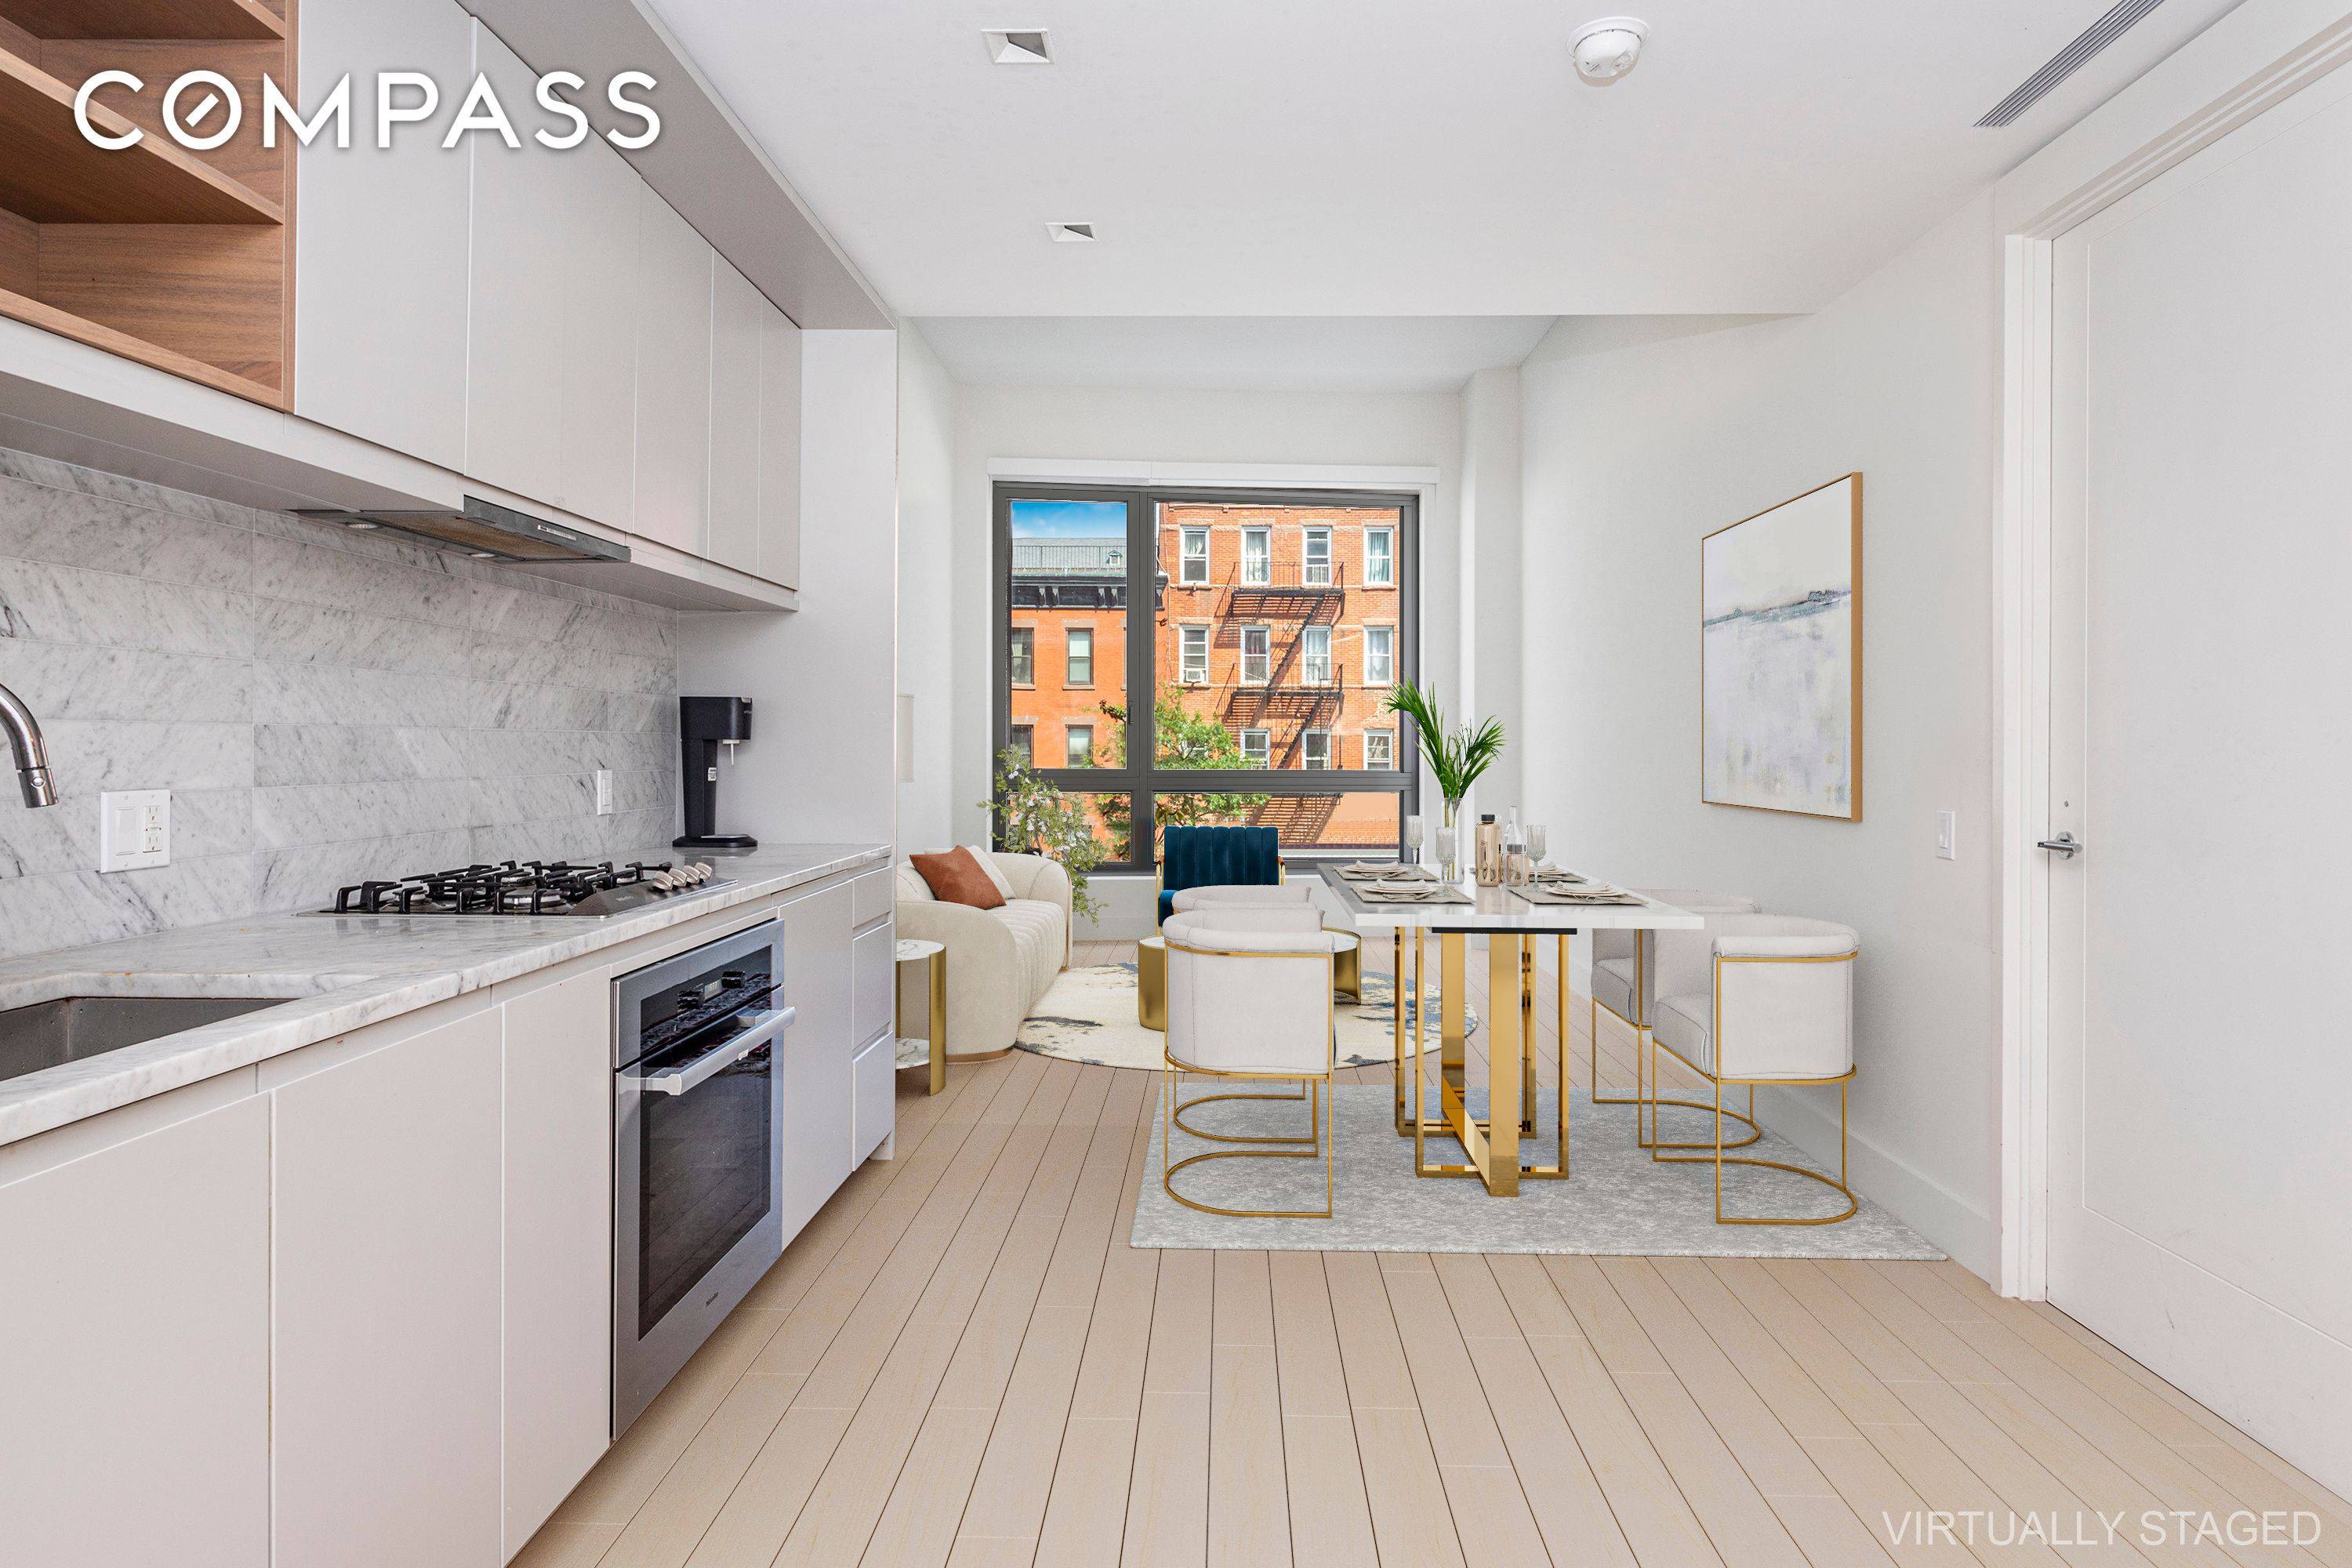 Welcome to 550 Vanderbilt, Prospect Heights premier luxury condominium and the first residential building to open in Pacific Park, Brooklyn.